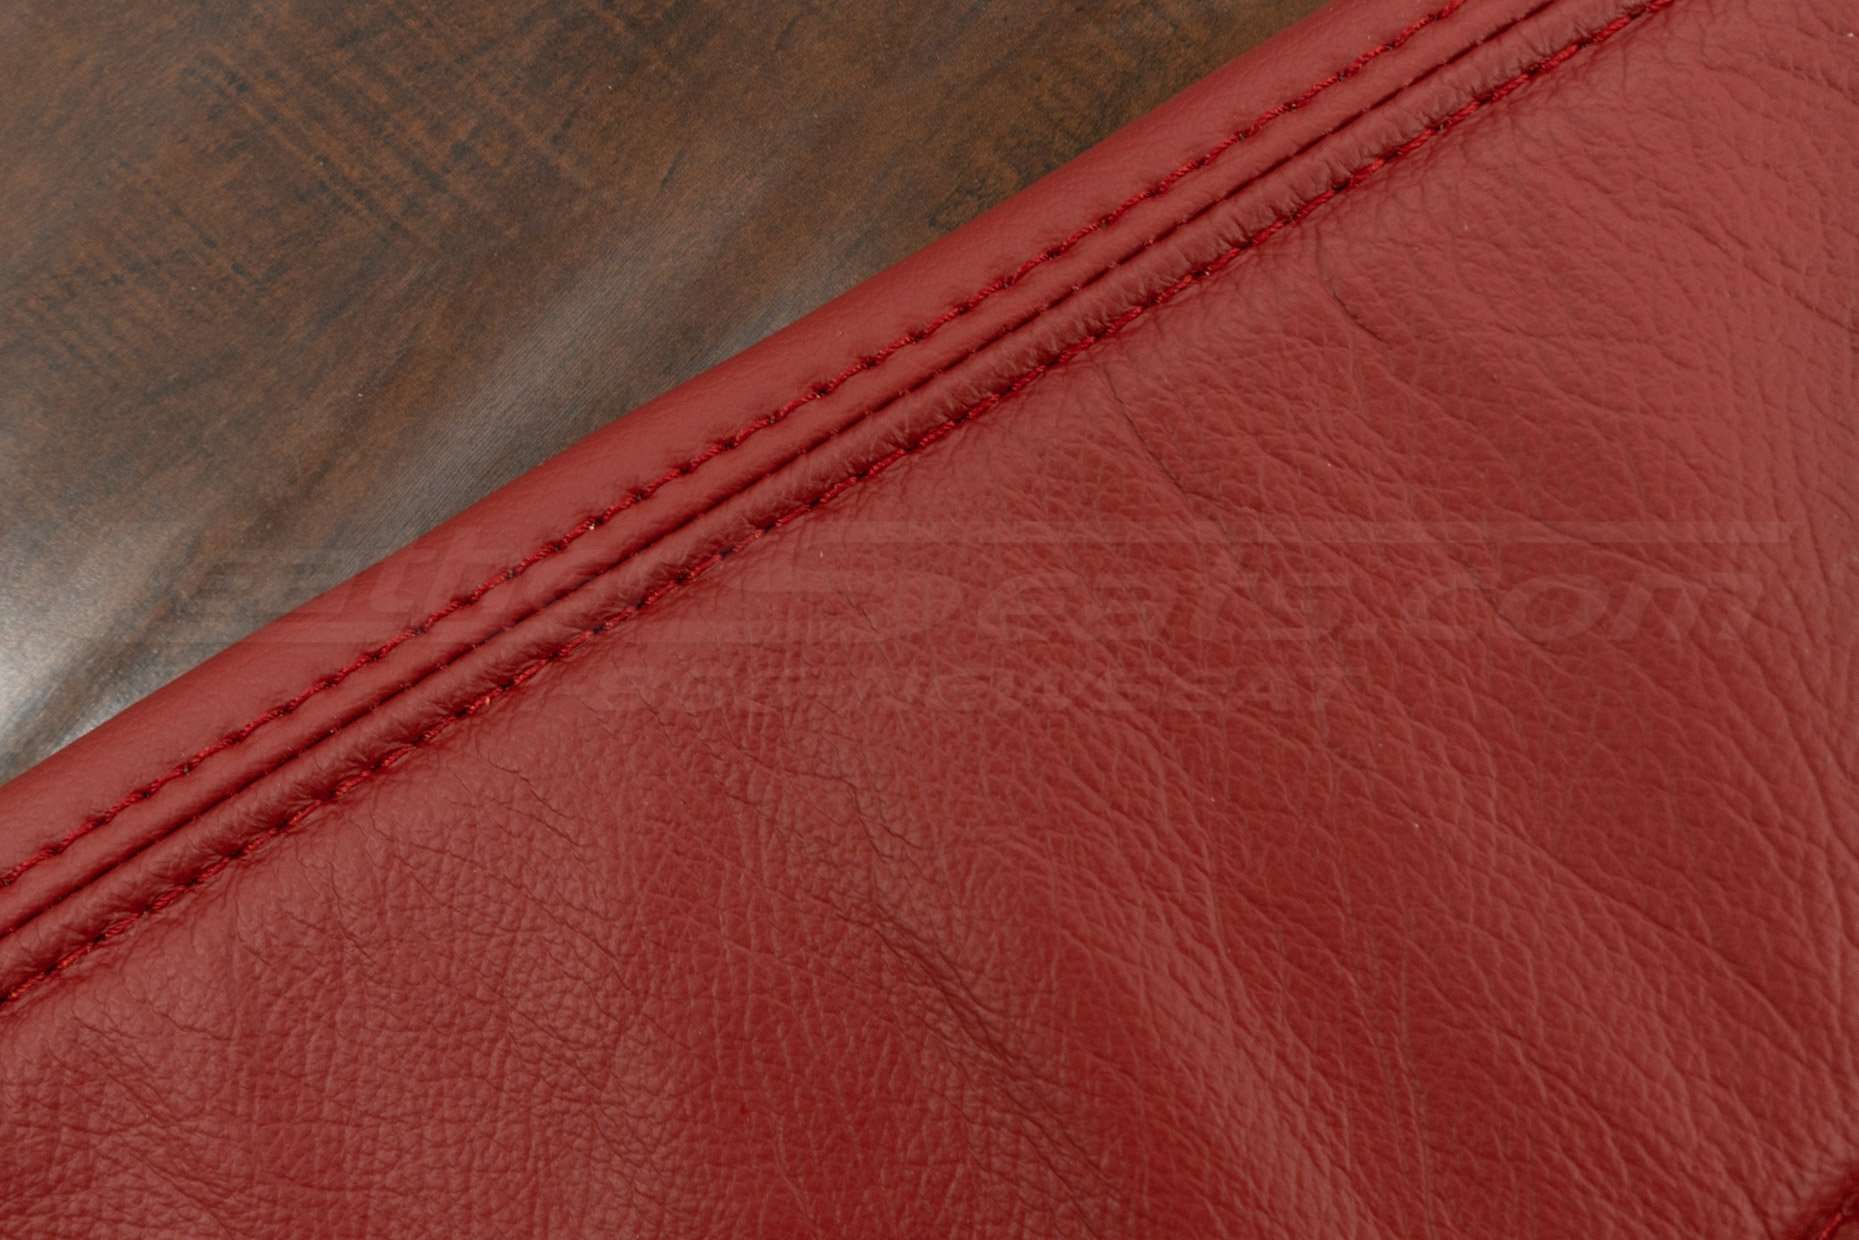 Matching double-stitching in Cardinal